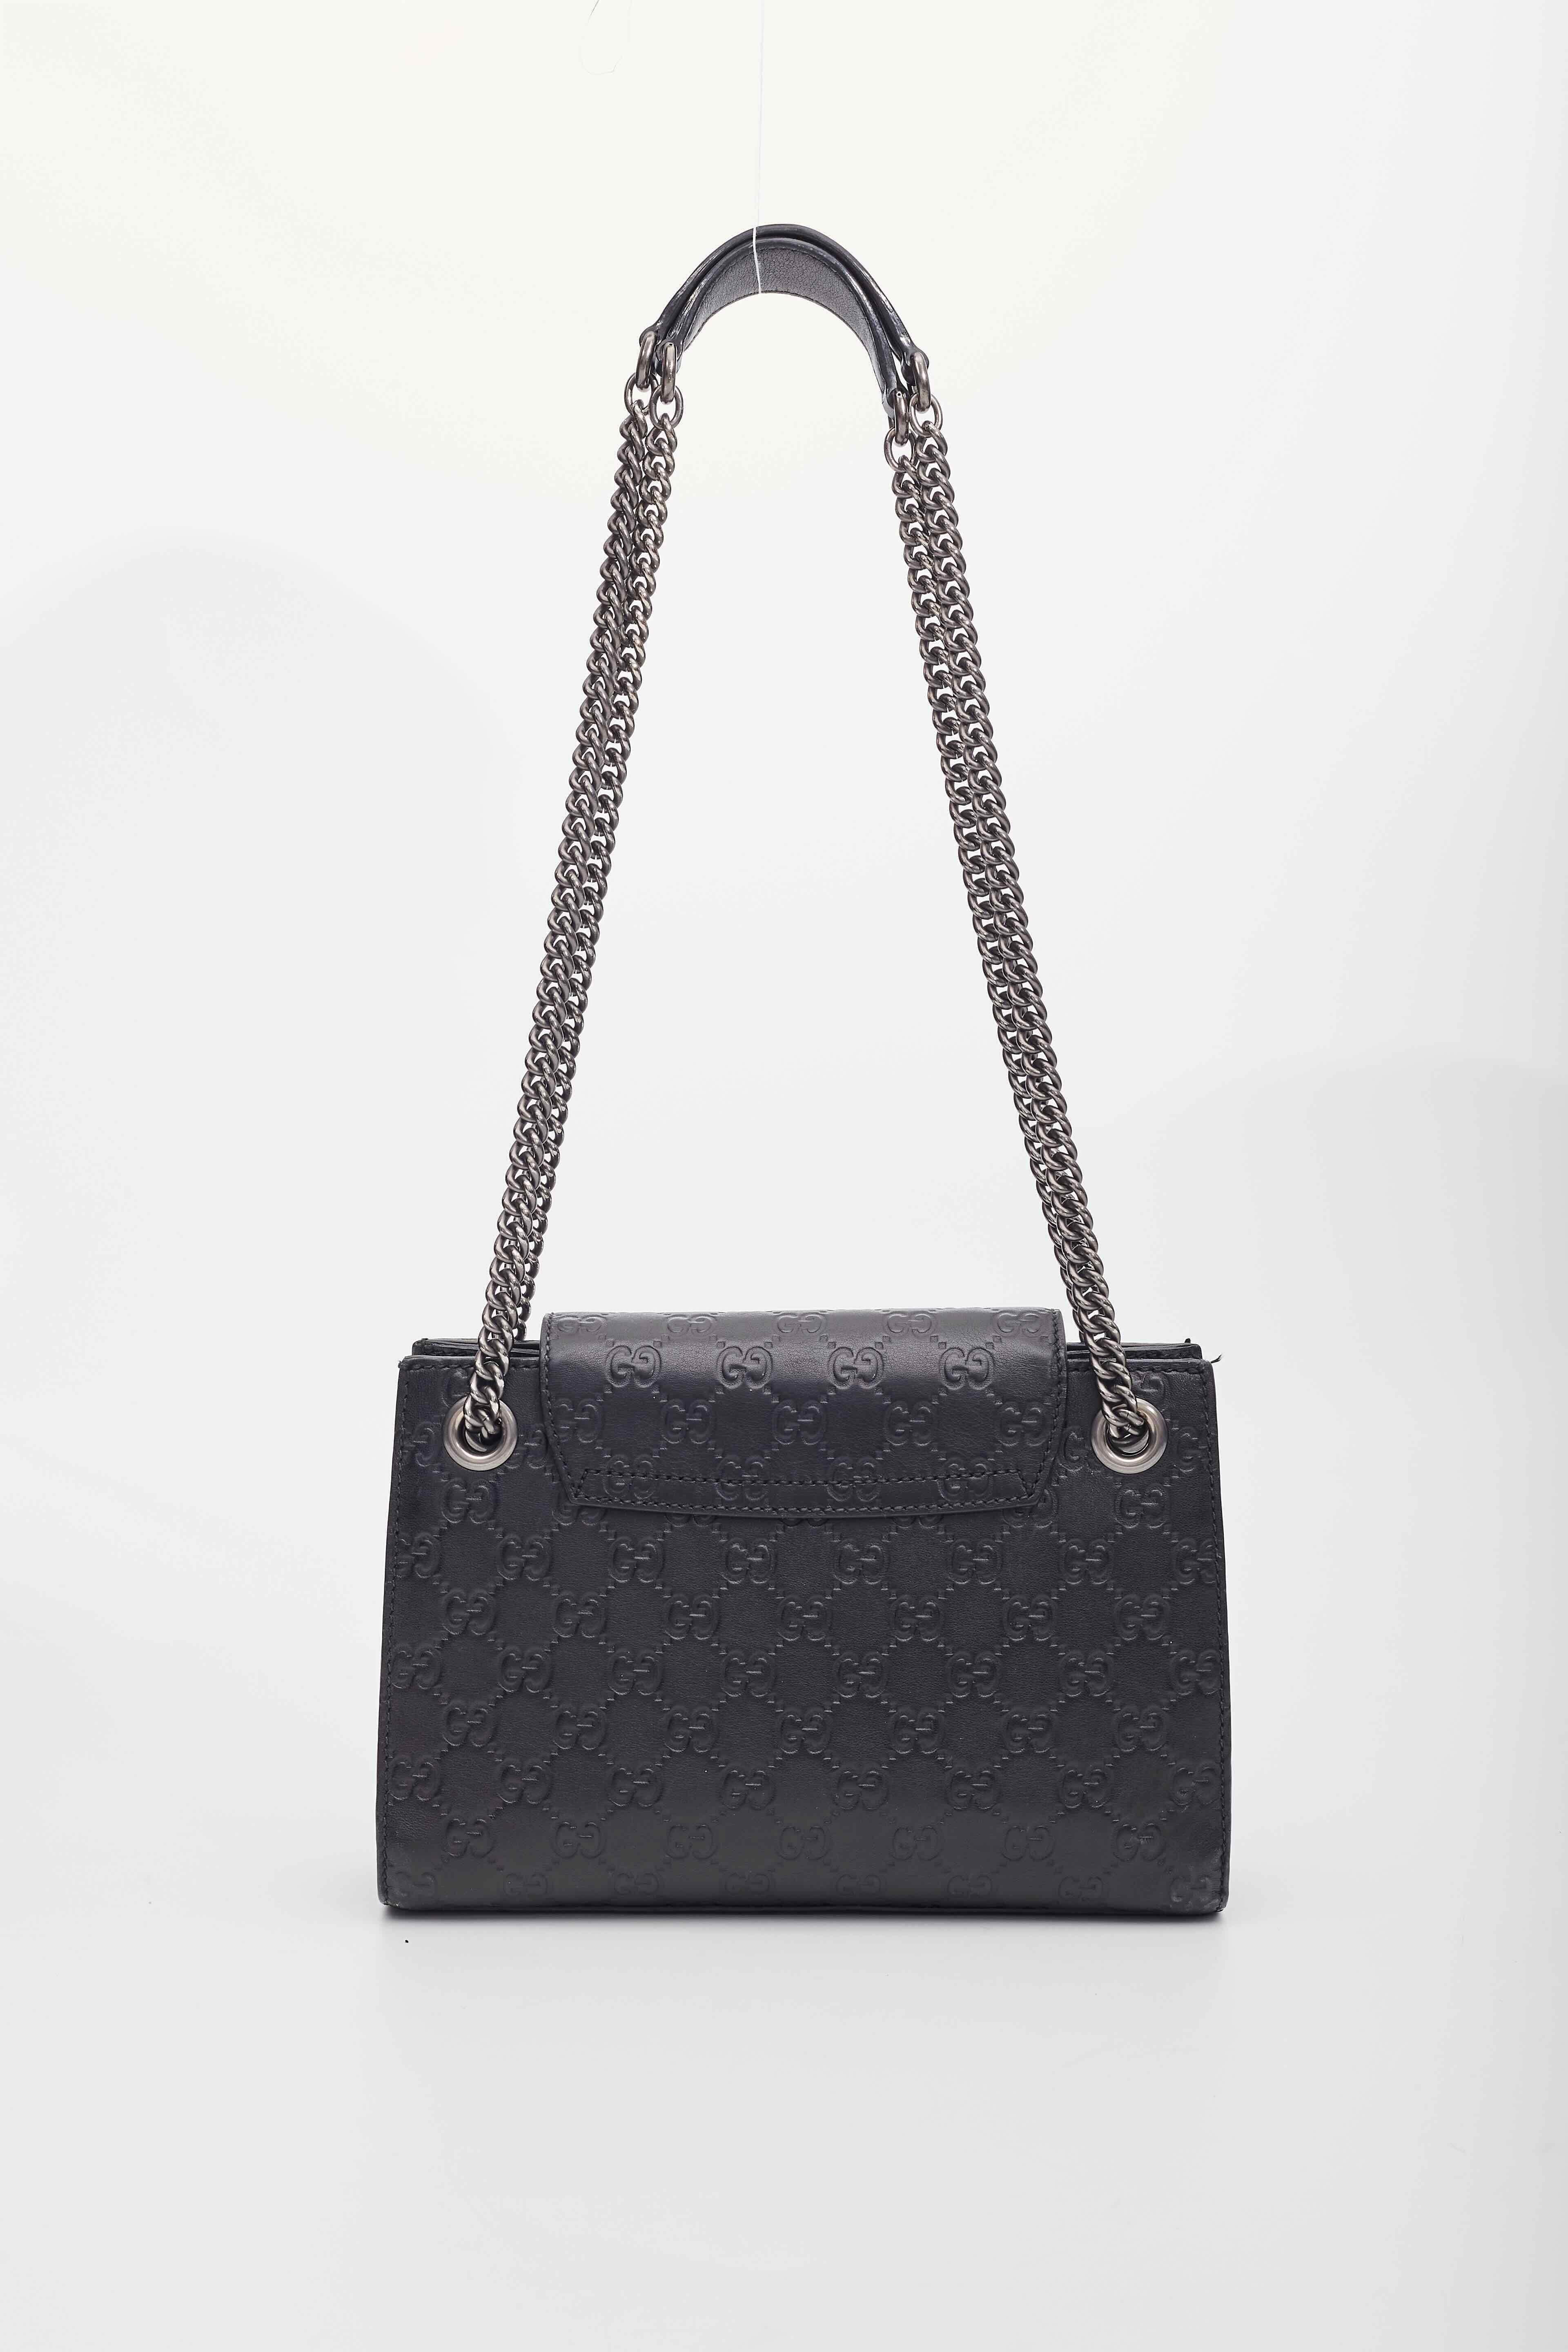 Gucci Black Leather Guccissima Emily Chain Shoulder Bag Small In Good Condition For Sale In Montreal, Quebec